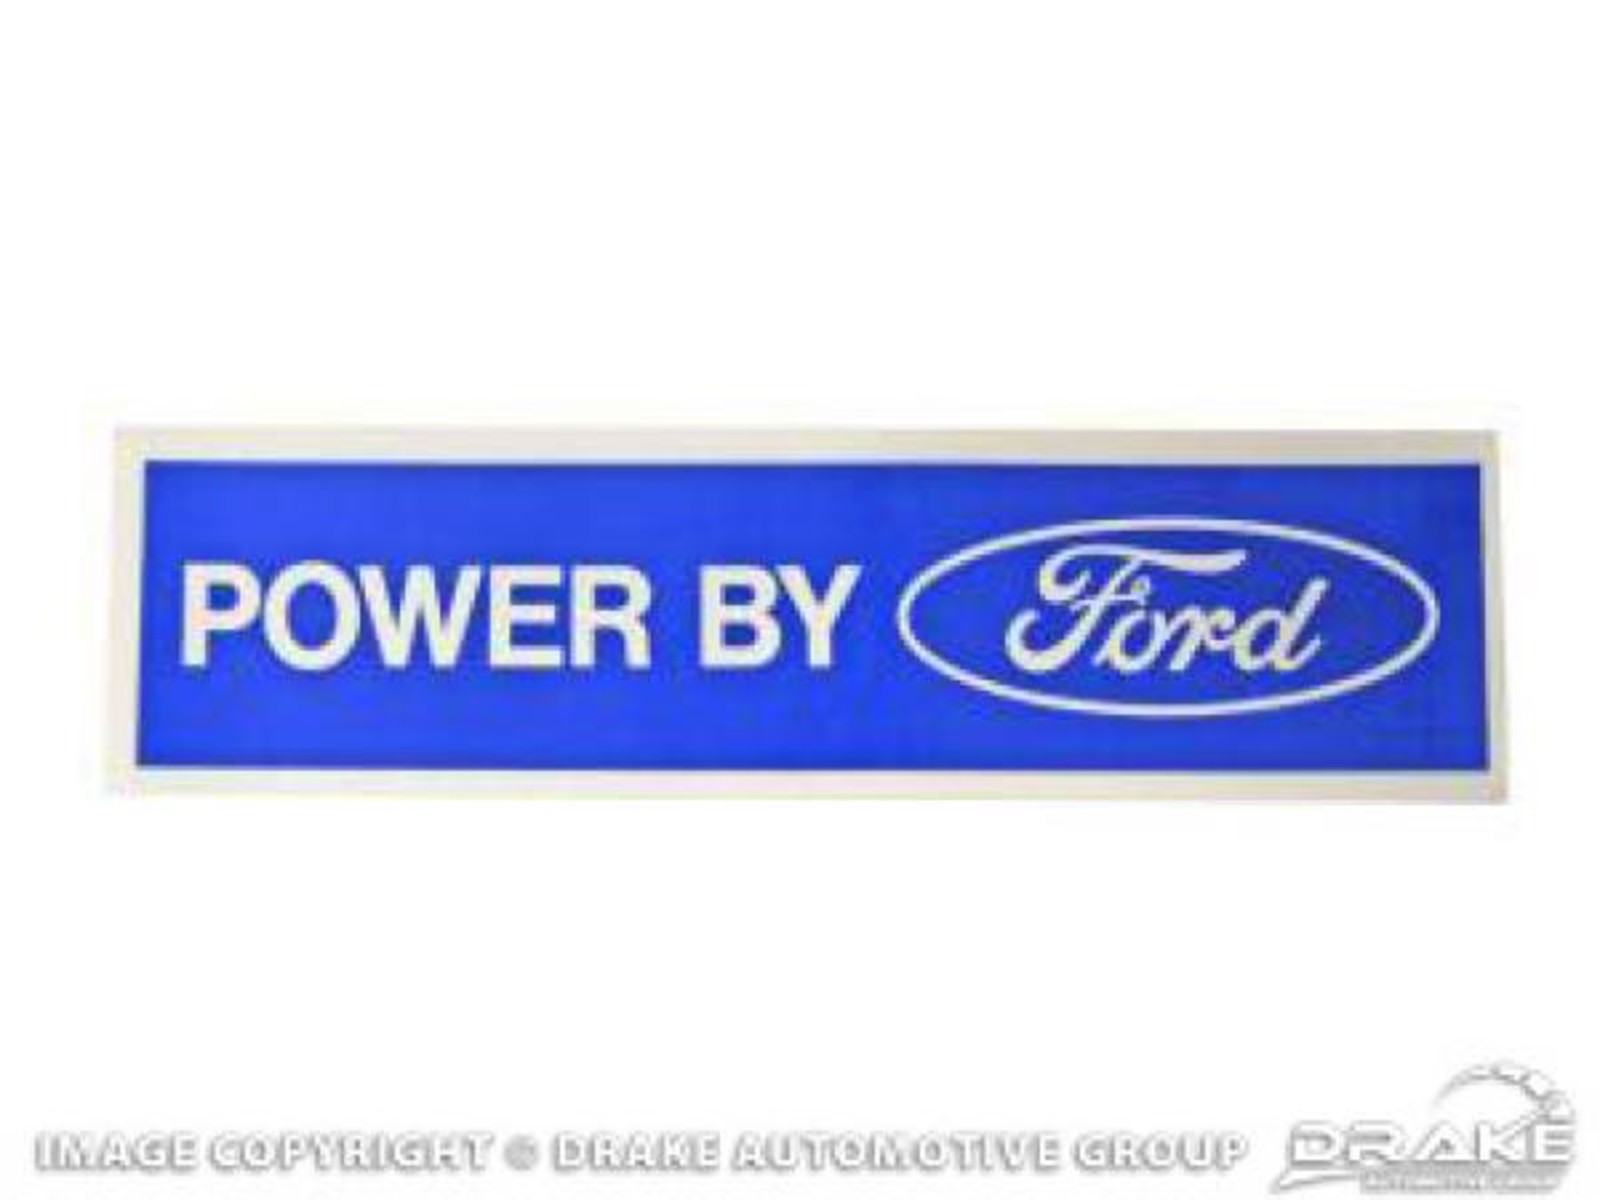 64-21 Powered by Ford Valve Cover Decal